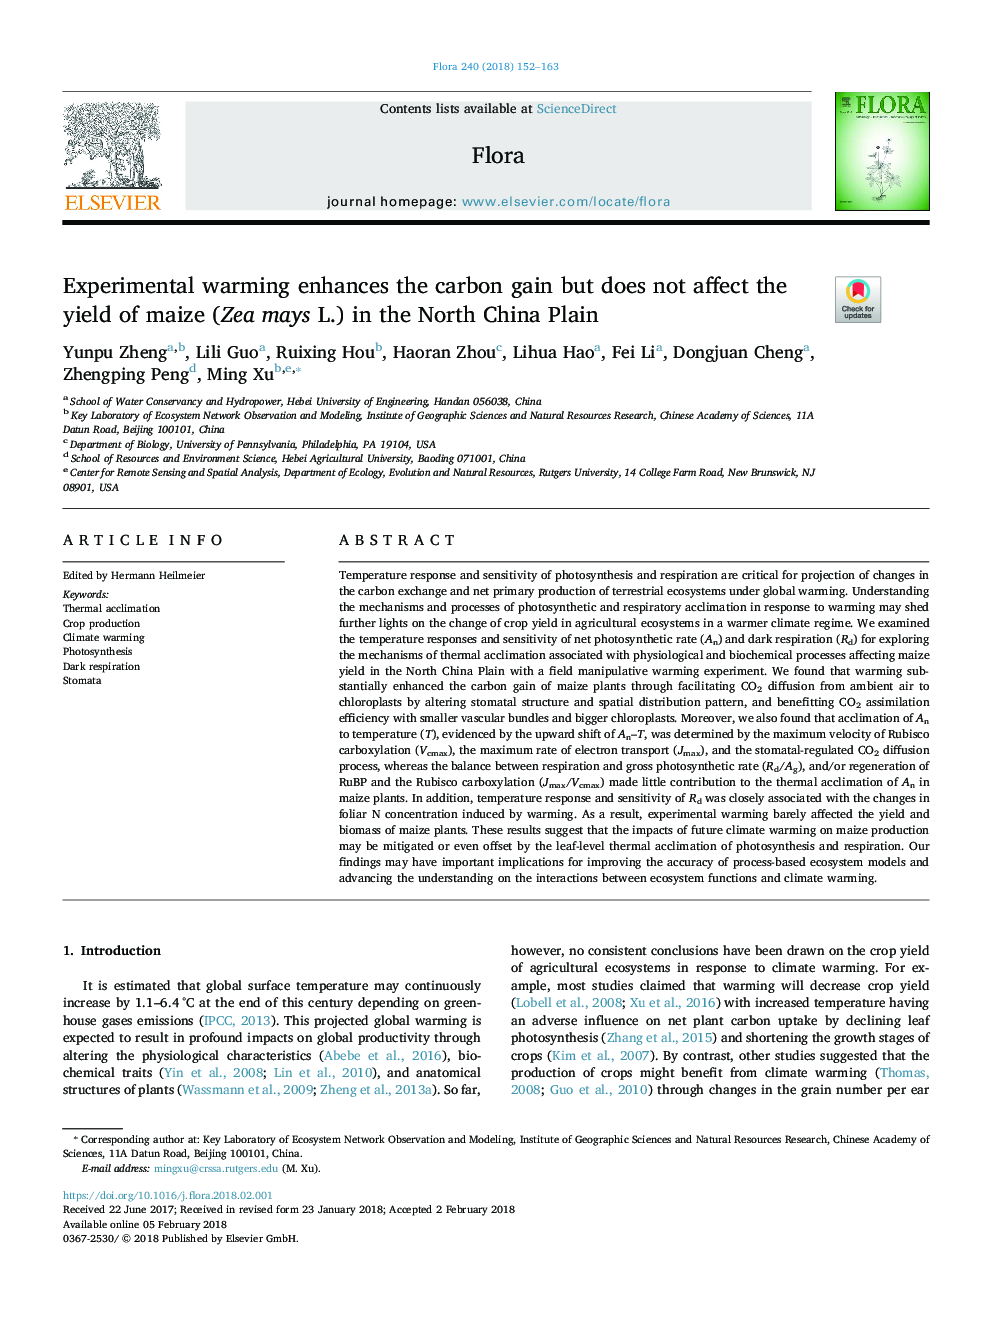 Experimental warming enhances the carbon gain but does not affect the yield of maize (Zea mays L.) in the North China Plain